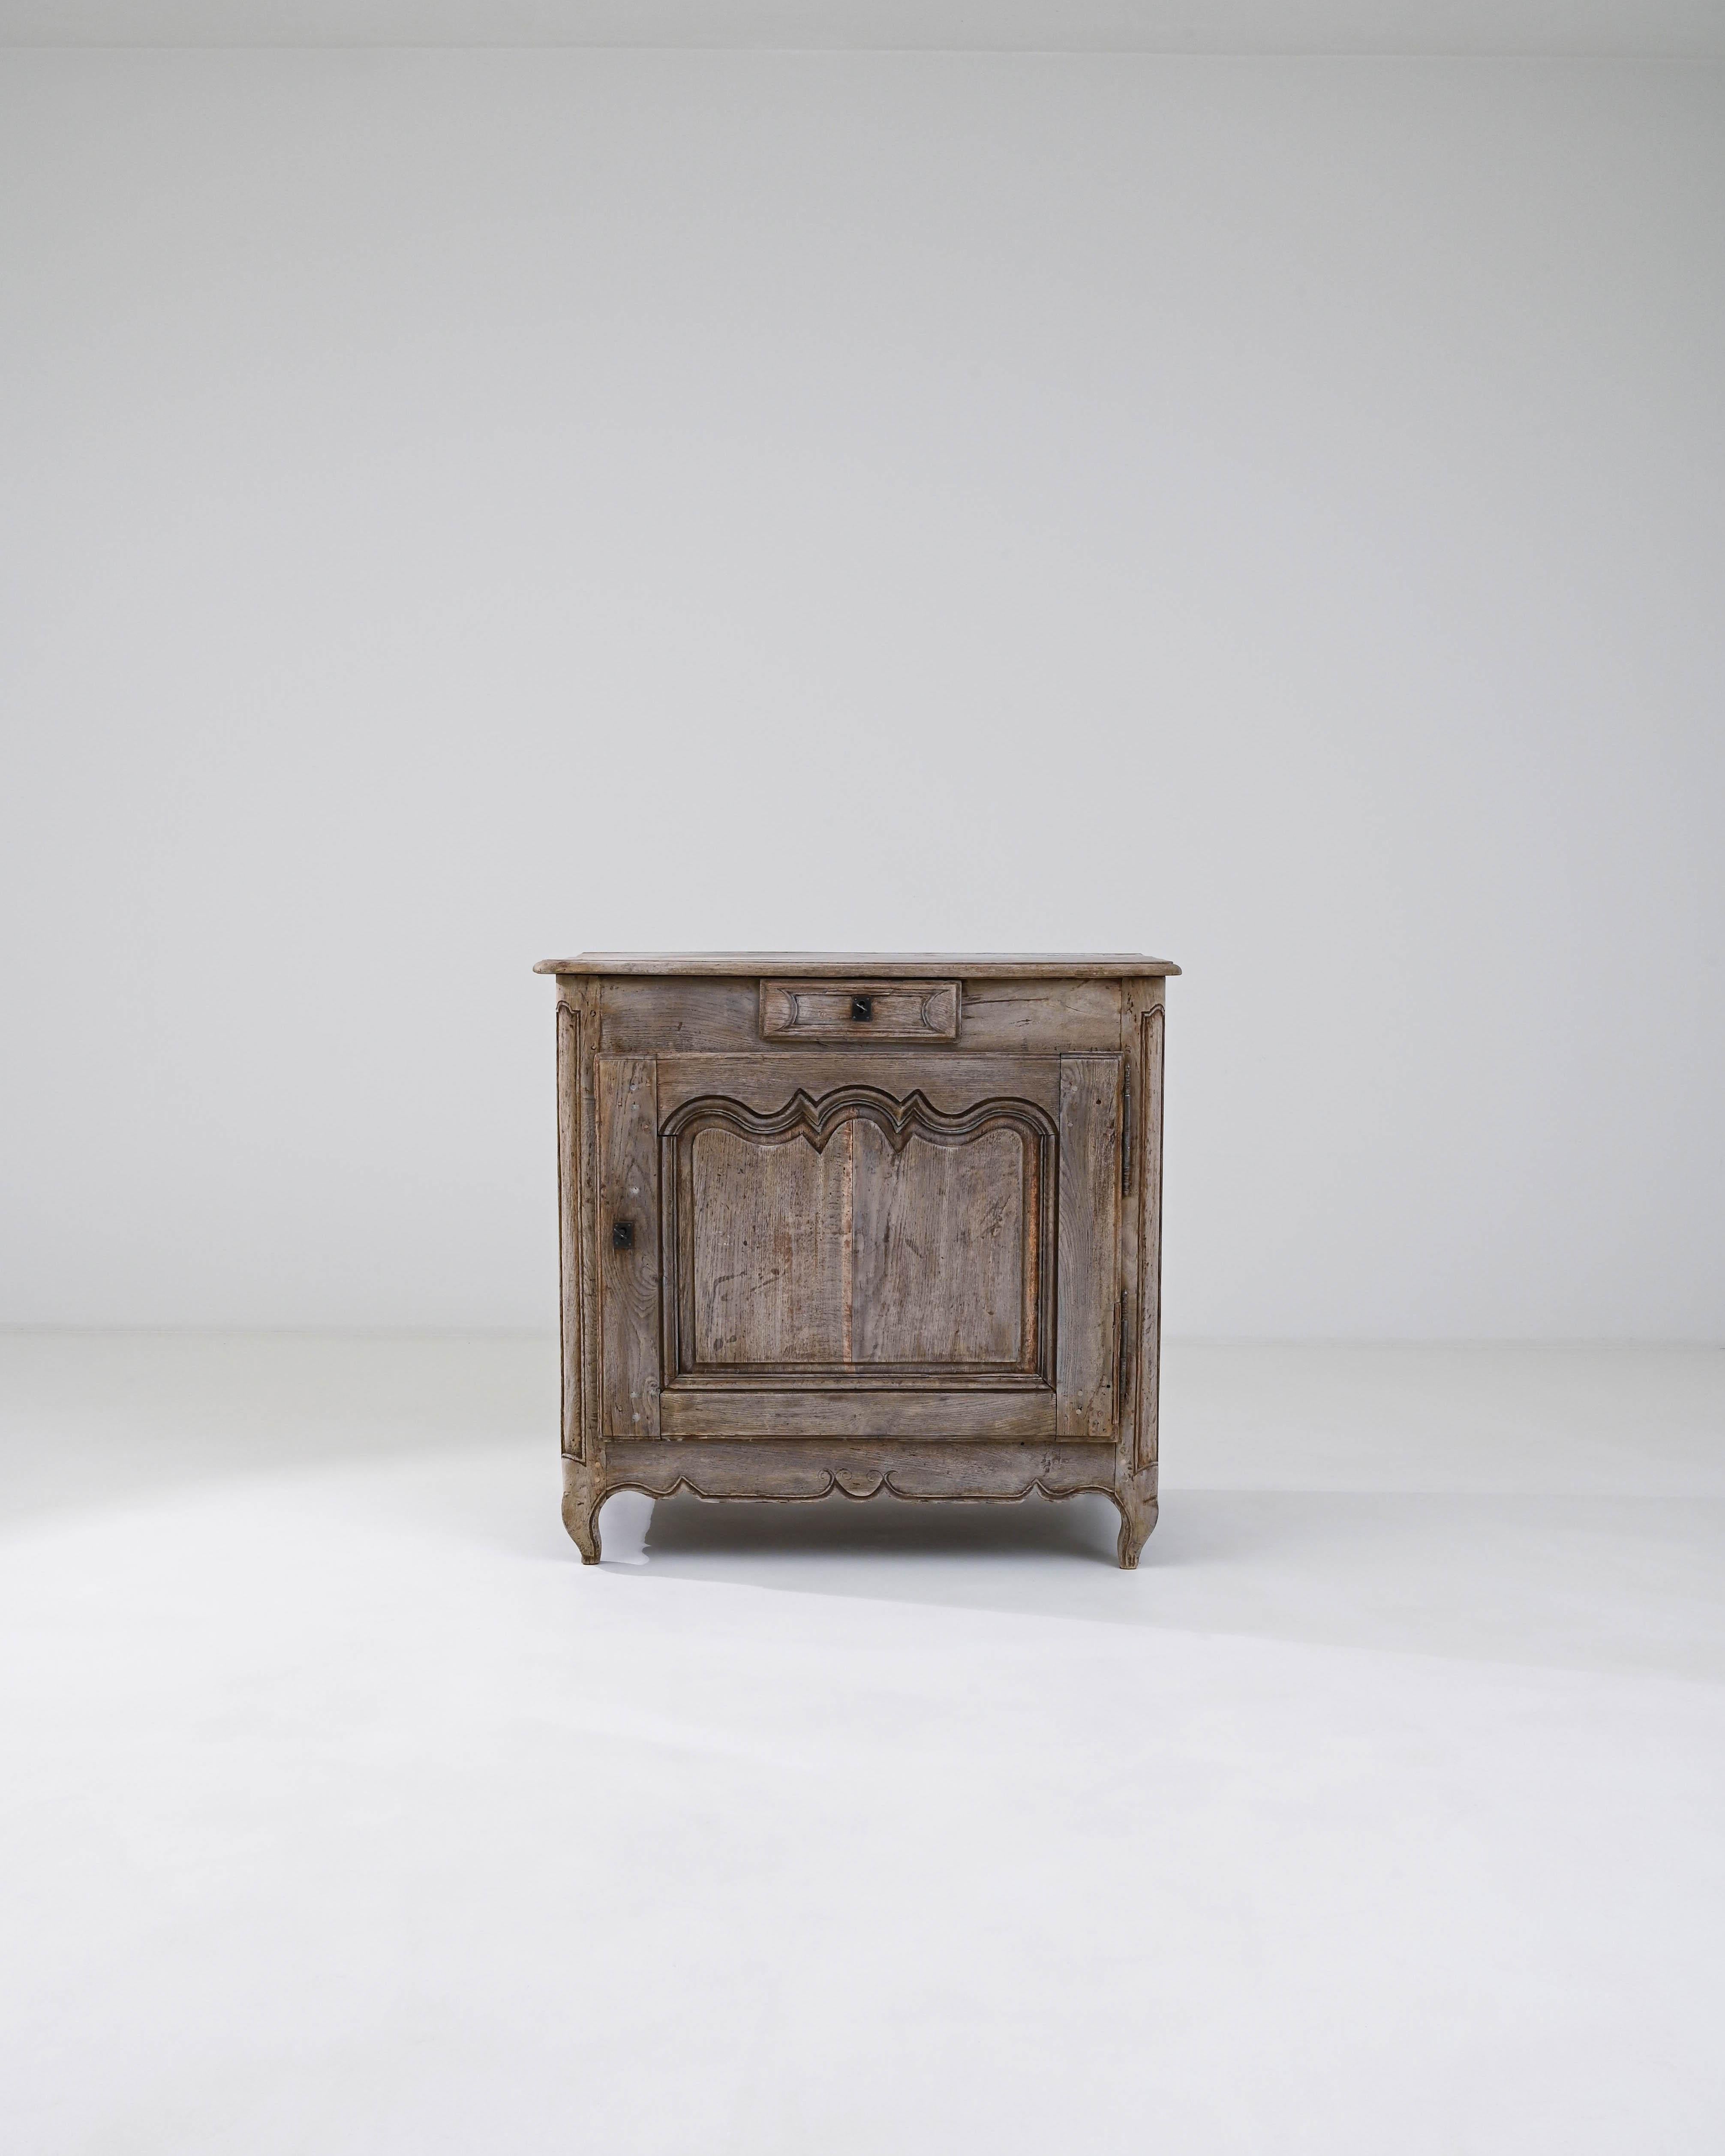 This Early 19th Century French Bleached Oak Buffet is a masterful representation of rustic elegance and timeless charm. The piece showcases a weathered finish that highlights the natural beauty of the oak, giving it an air of history and character.